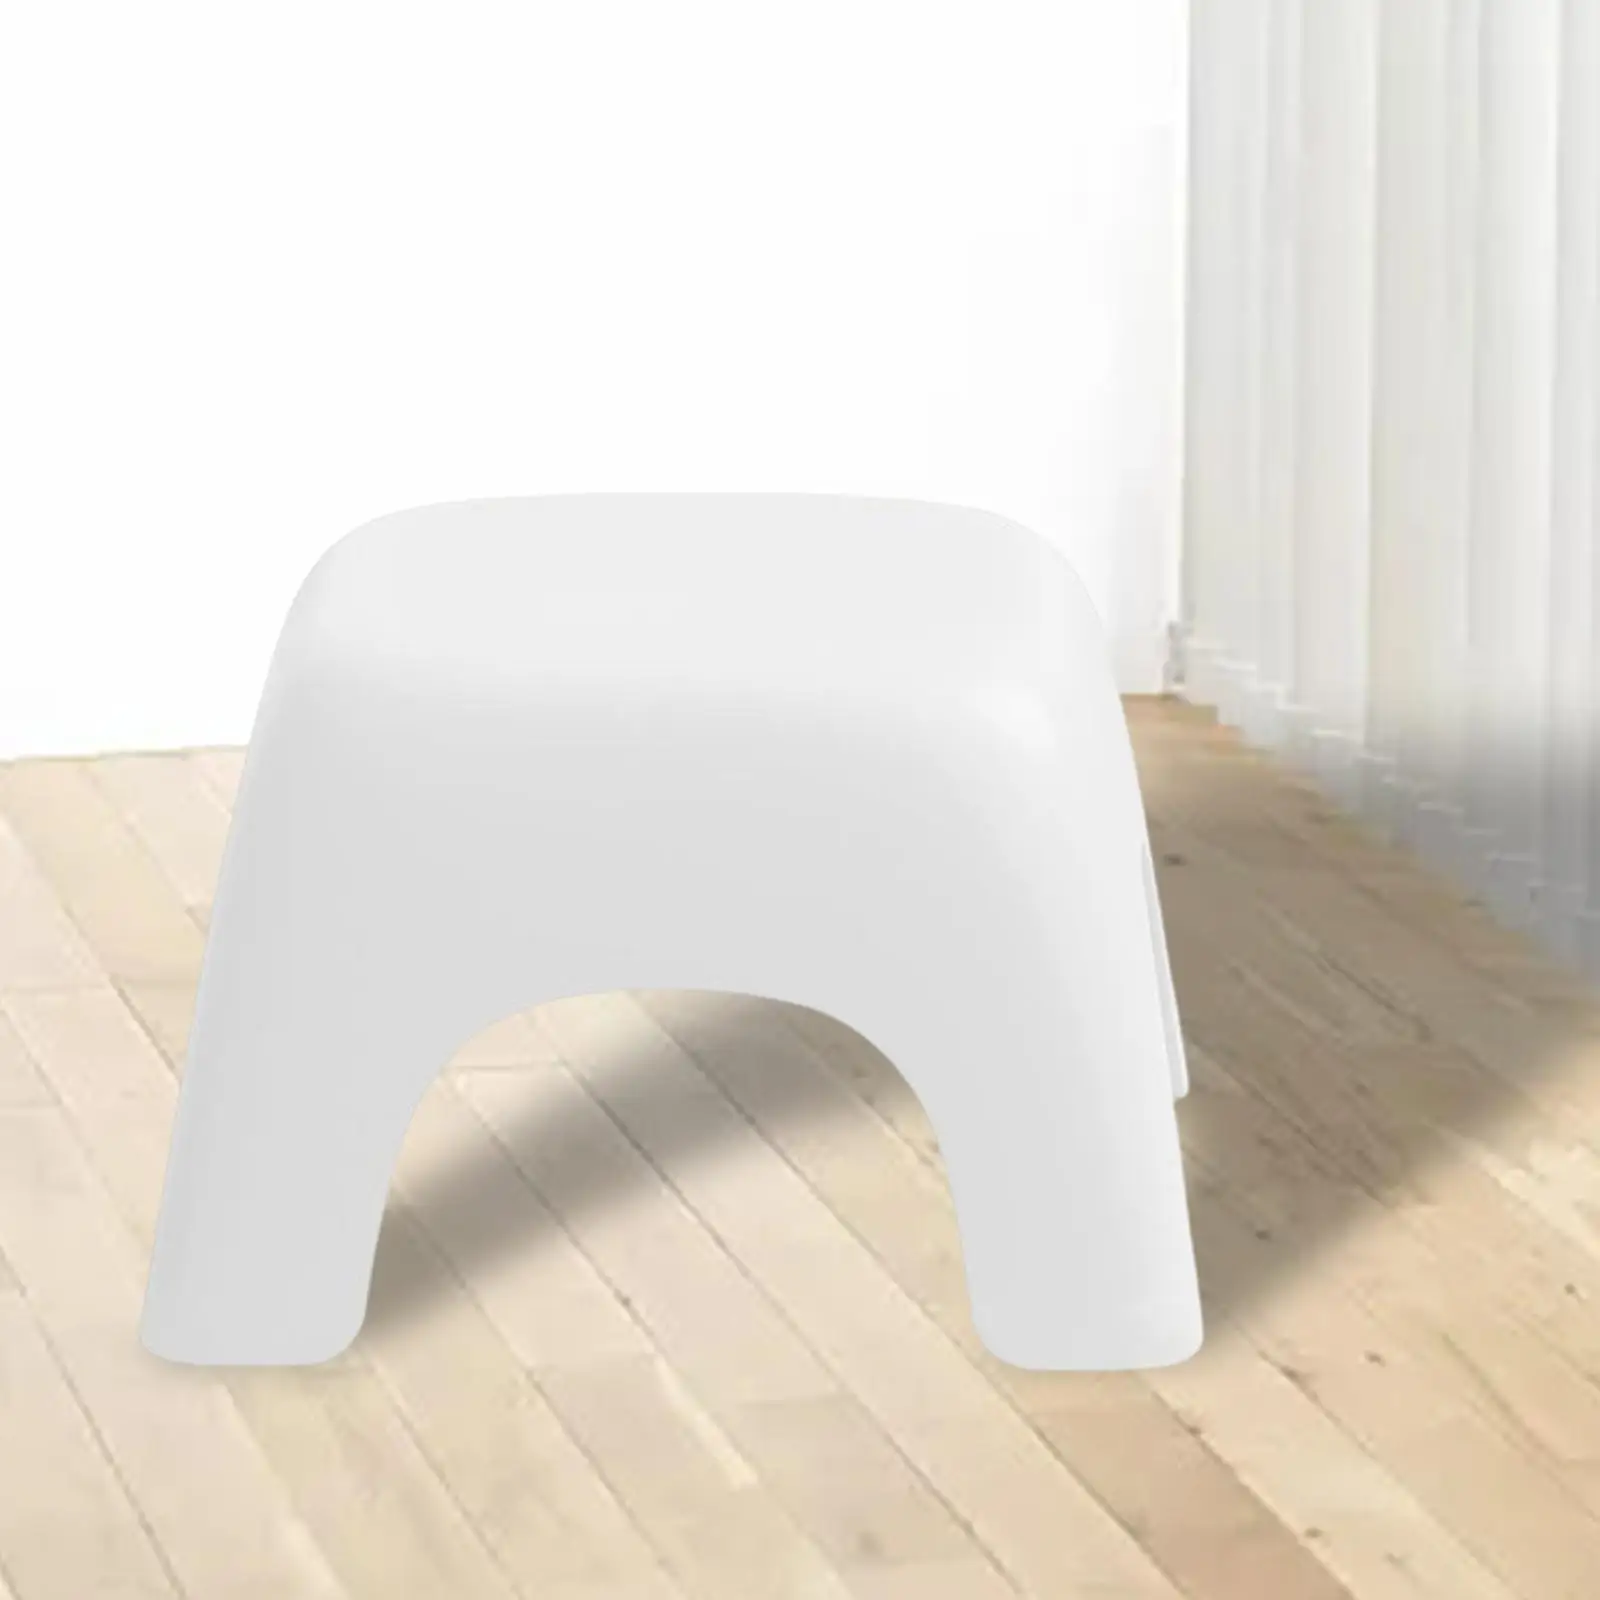 Living Room Small Stool Step Footrest Bench Toy Ottoman Toddler Stool Non Slip Durable Shoe Change Stool Chair for Rooms Kitchen